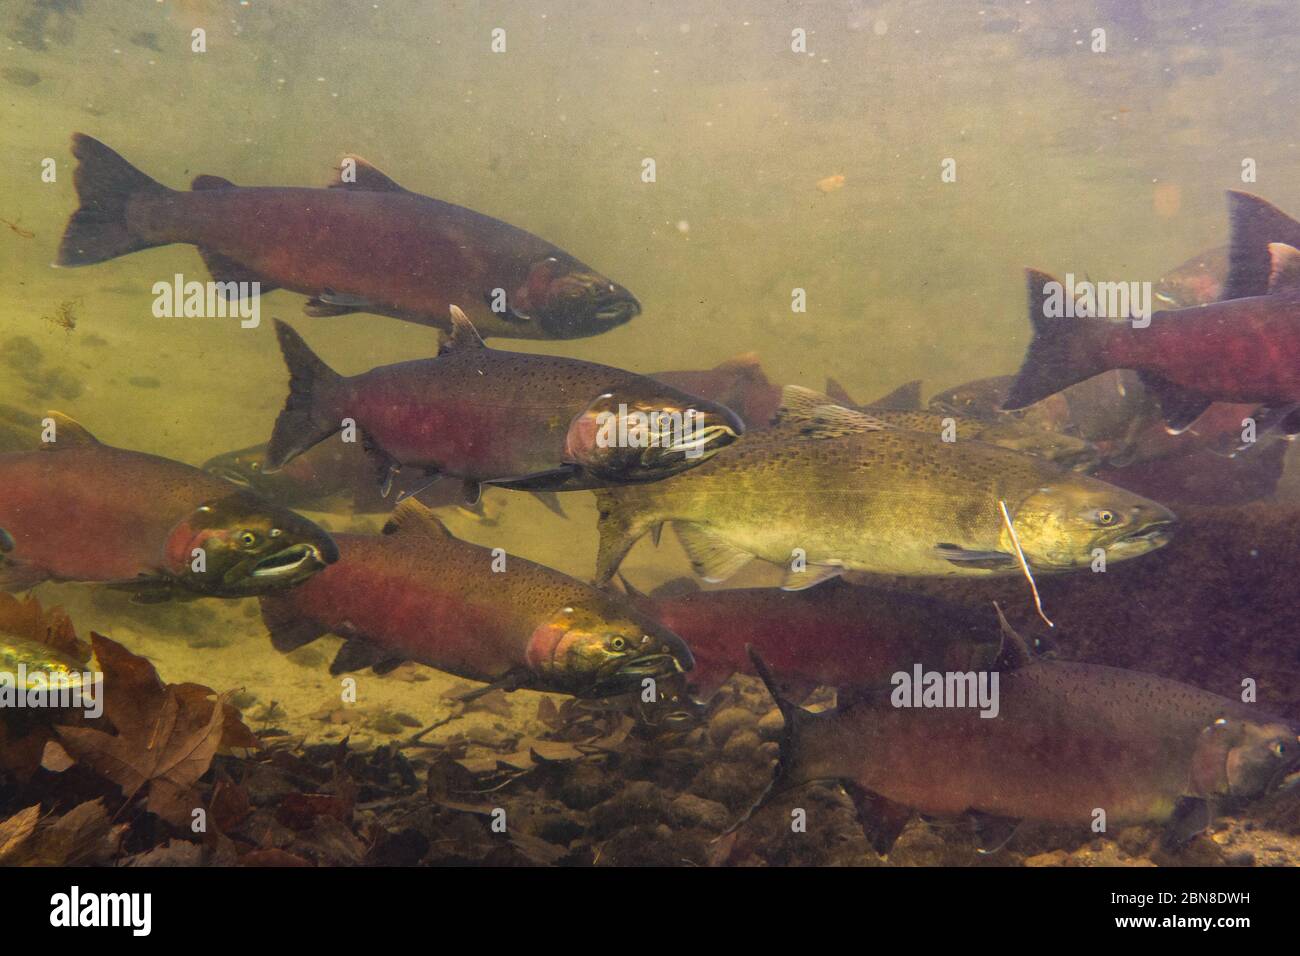 A school of Coho and Chinook salmon swimming in the Skagit River, Washington, USA. Stock Photo